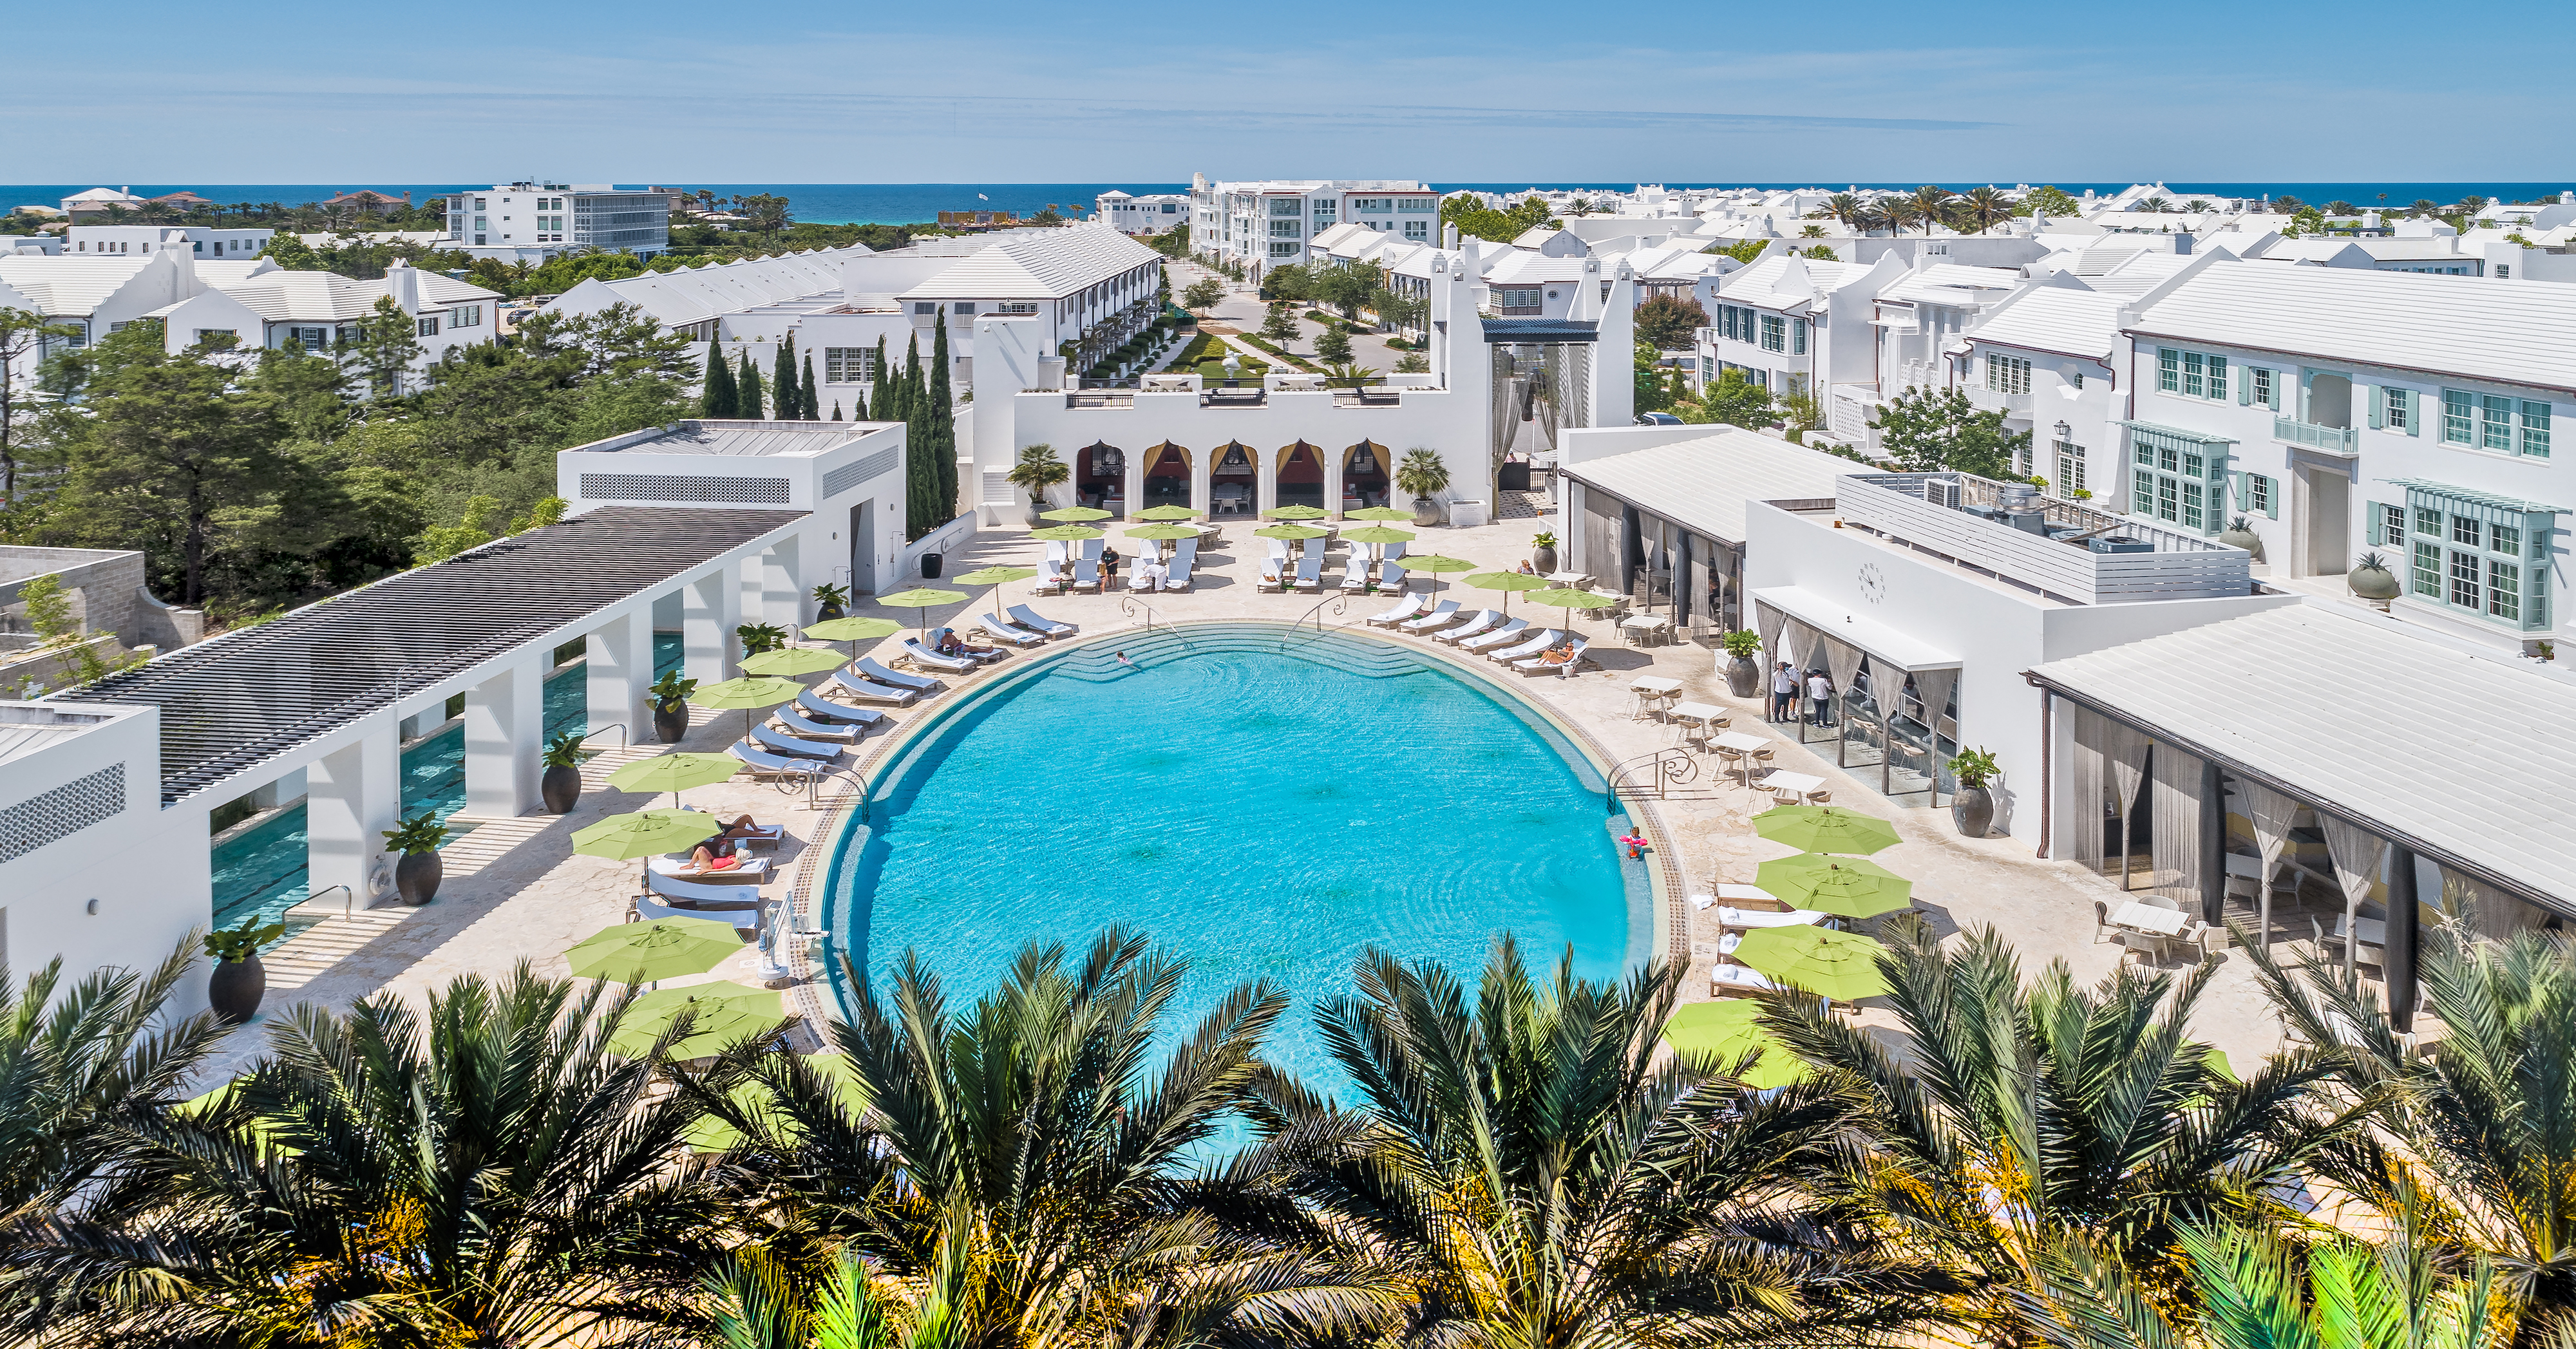 One of the luxurious outdoor pool & spas at Alys Beach